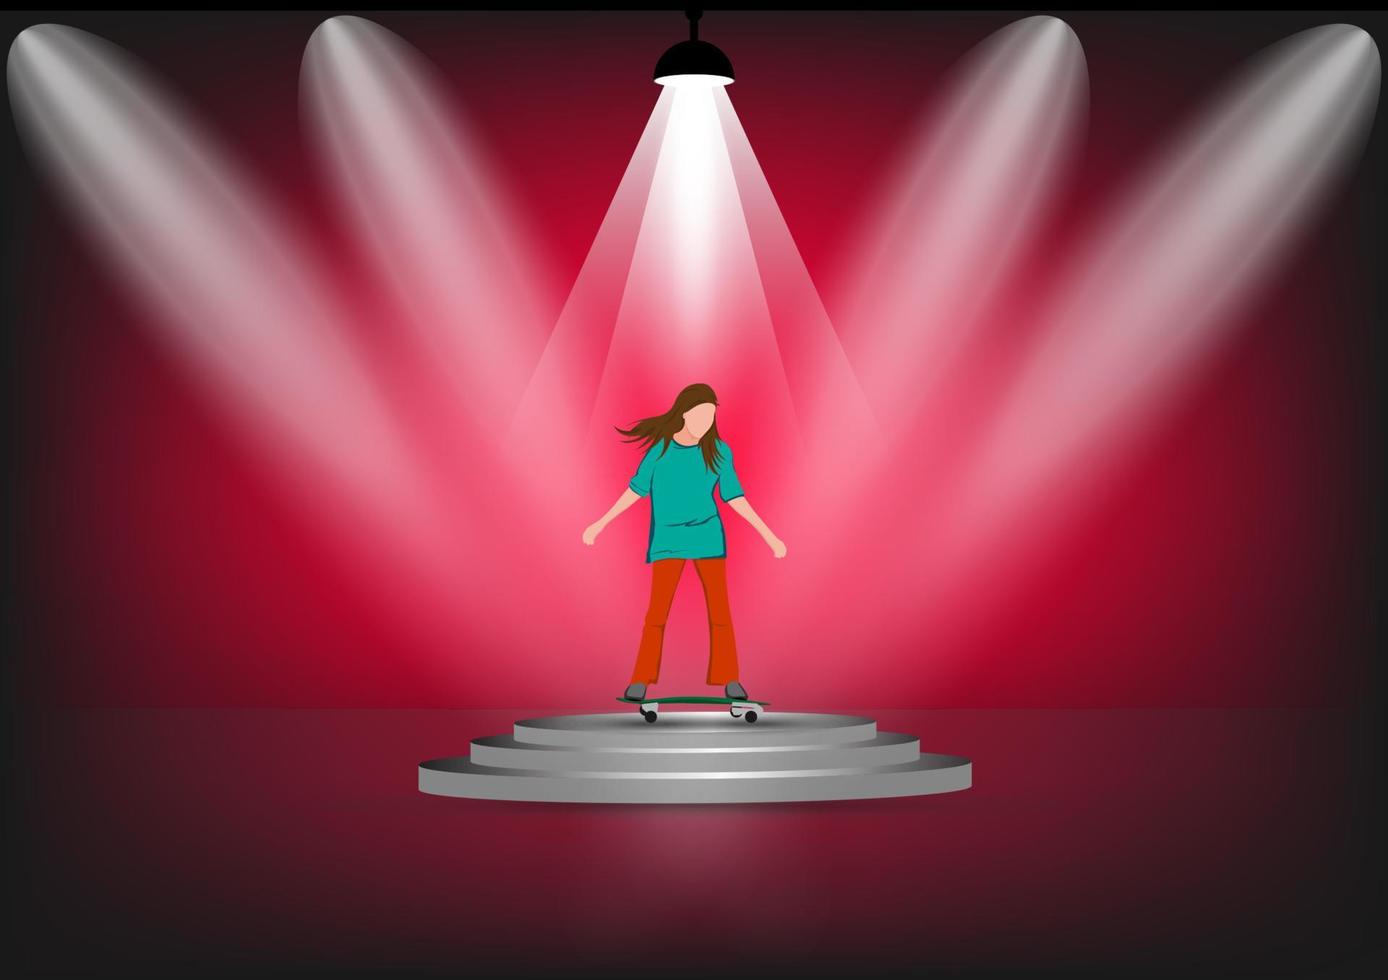 vector image girl cartoon character riding a skateboard or surf skate standing on podium with spotlight